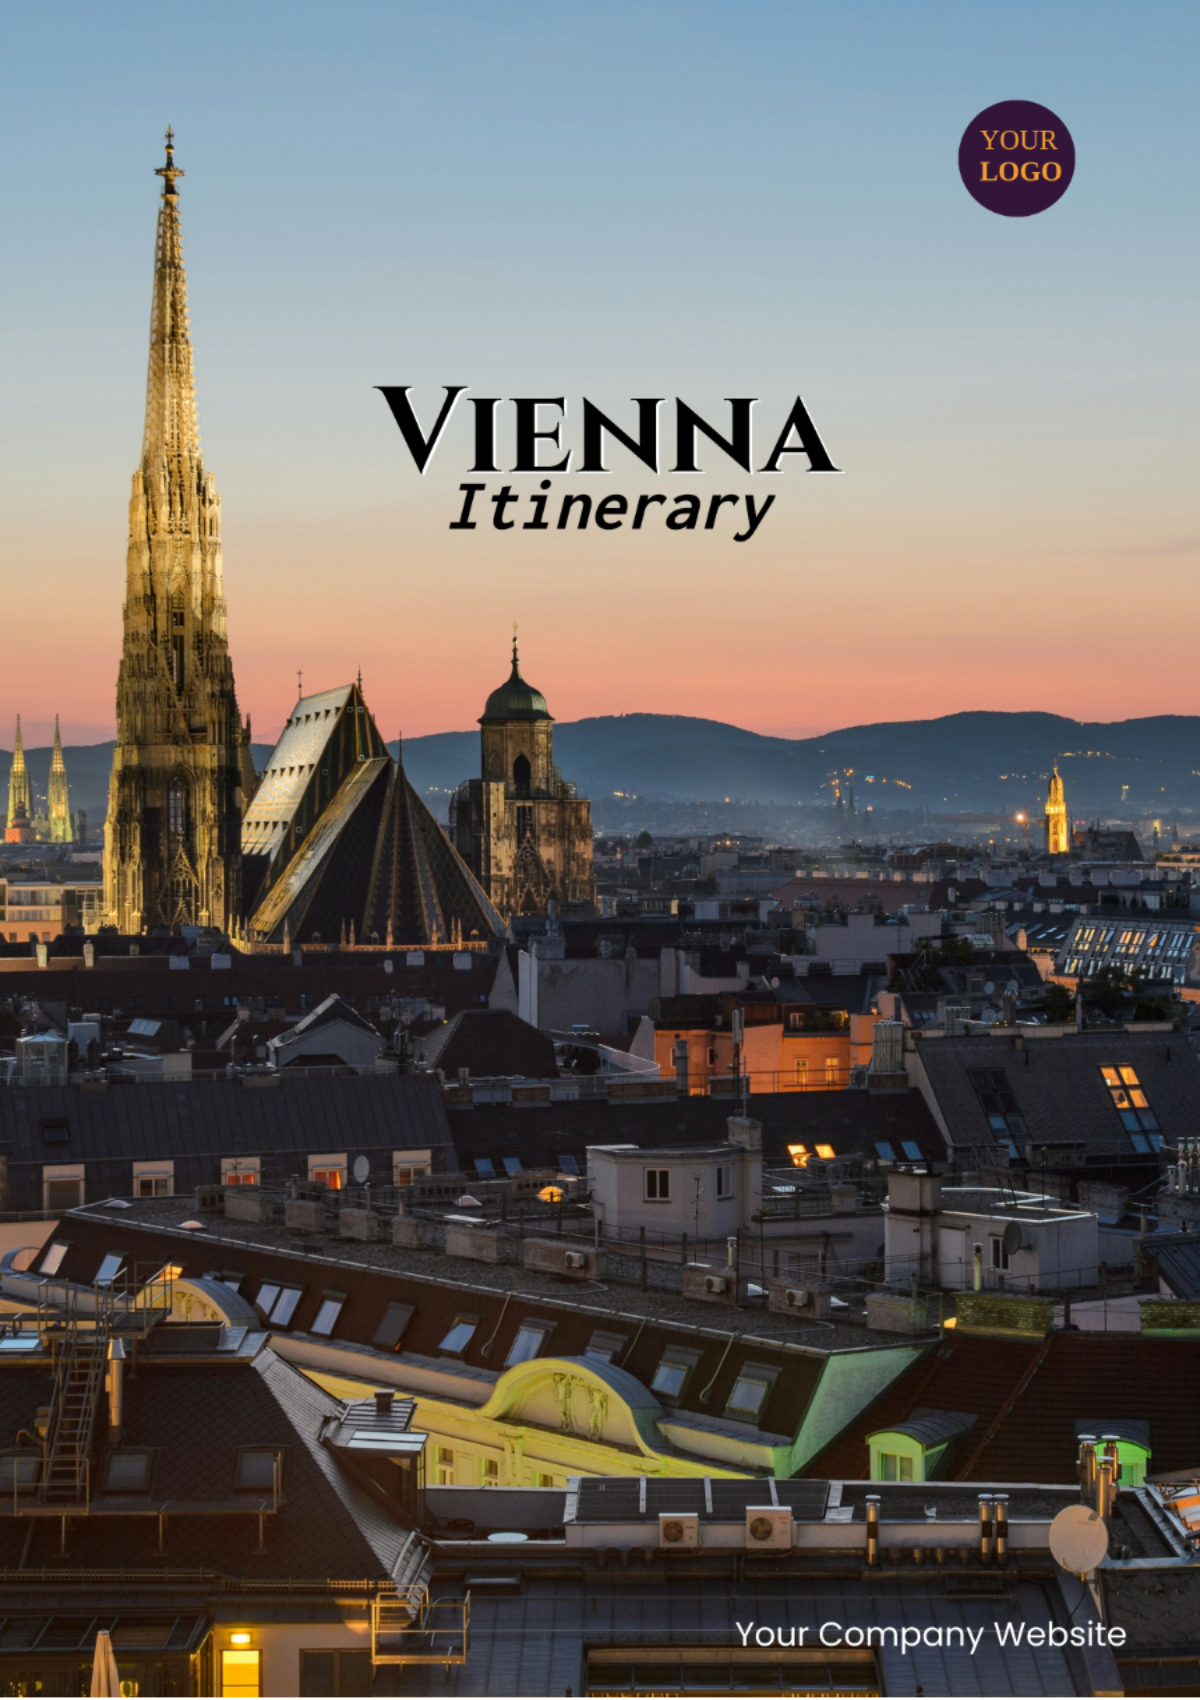 Free 1 Day Vienna Itinerary Template